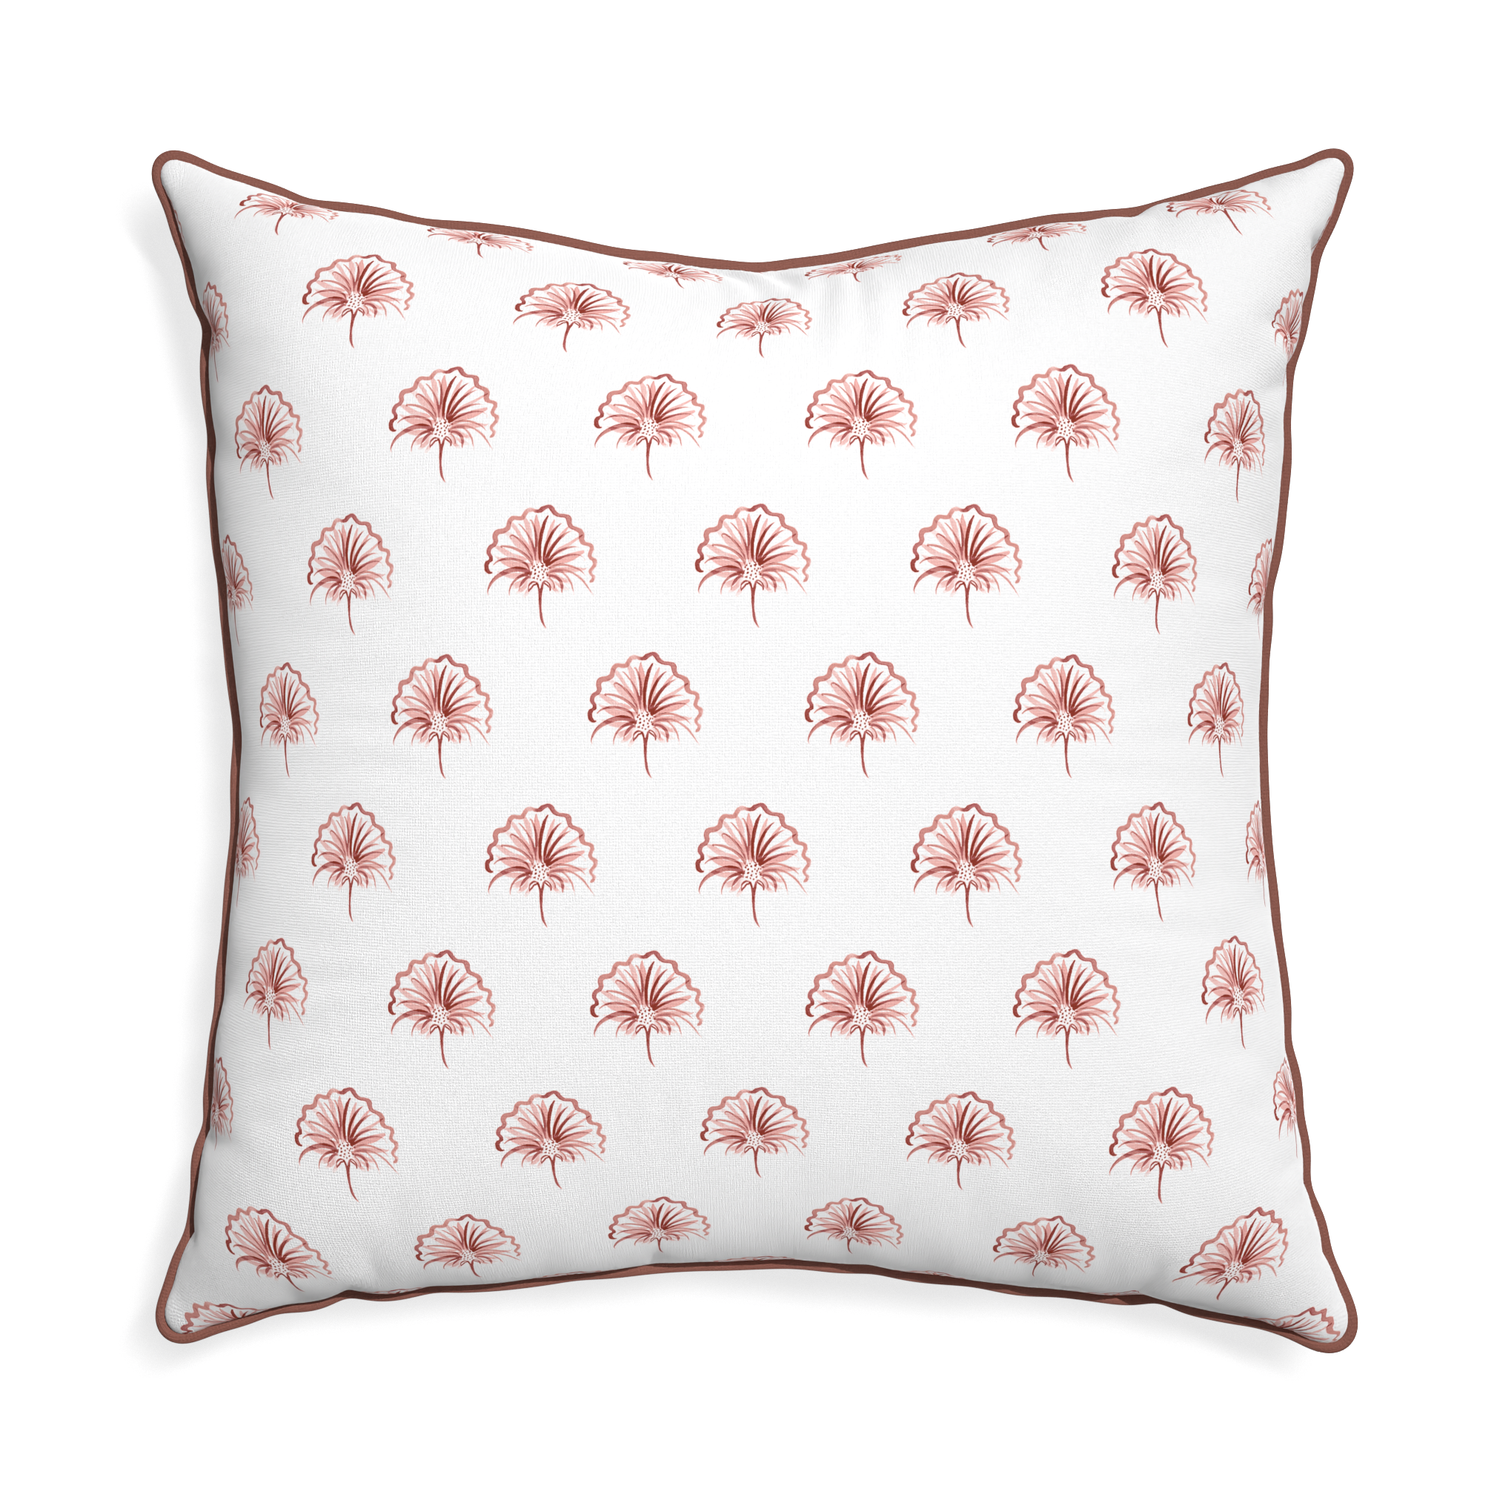 Euro-sham penelope rose custom pillow with w piping on white background